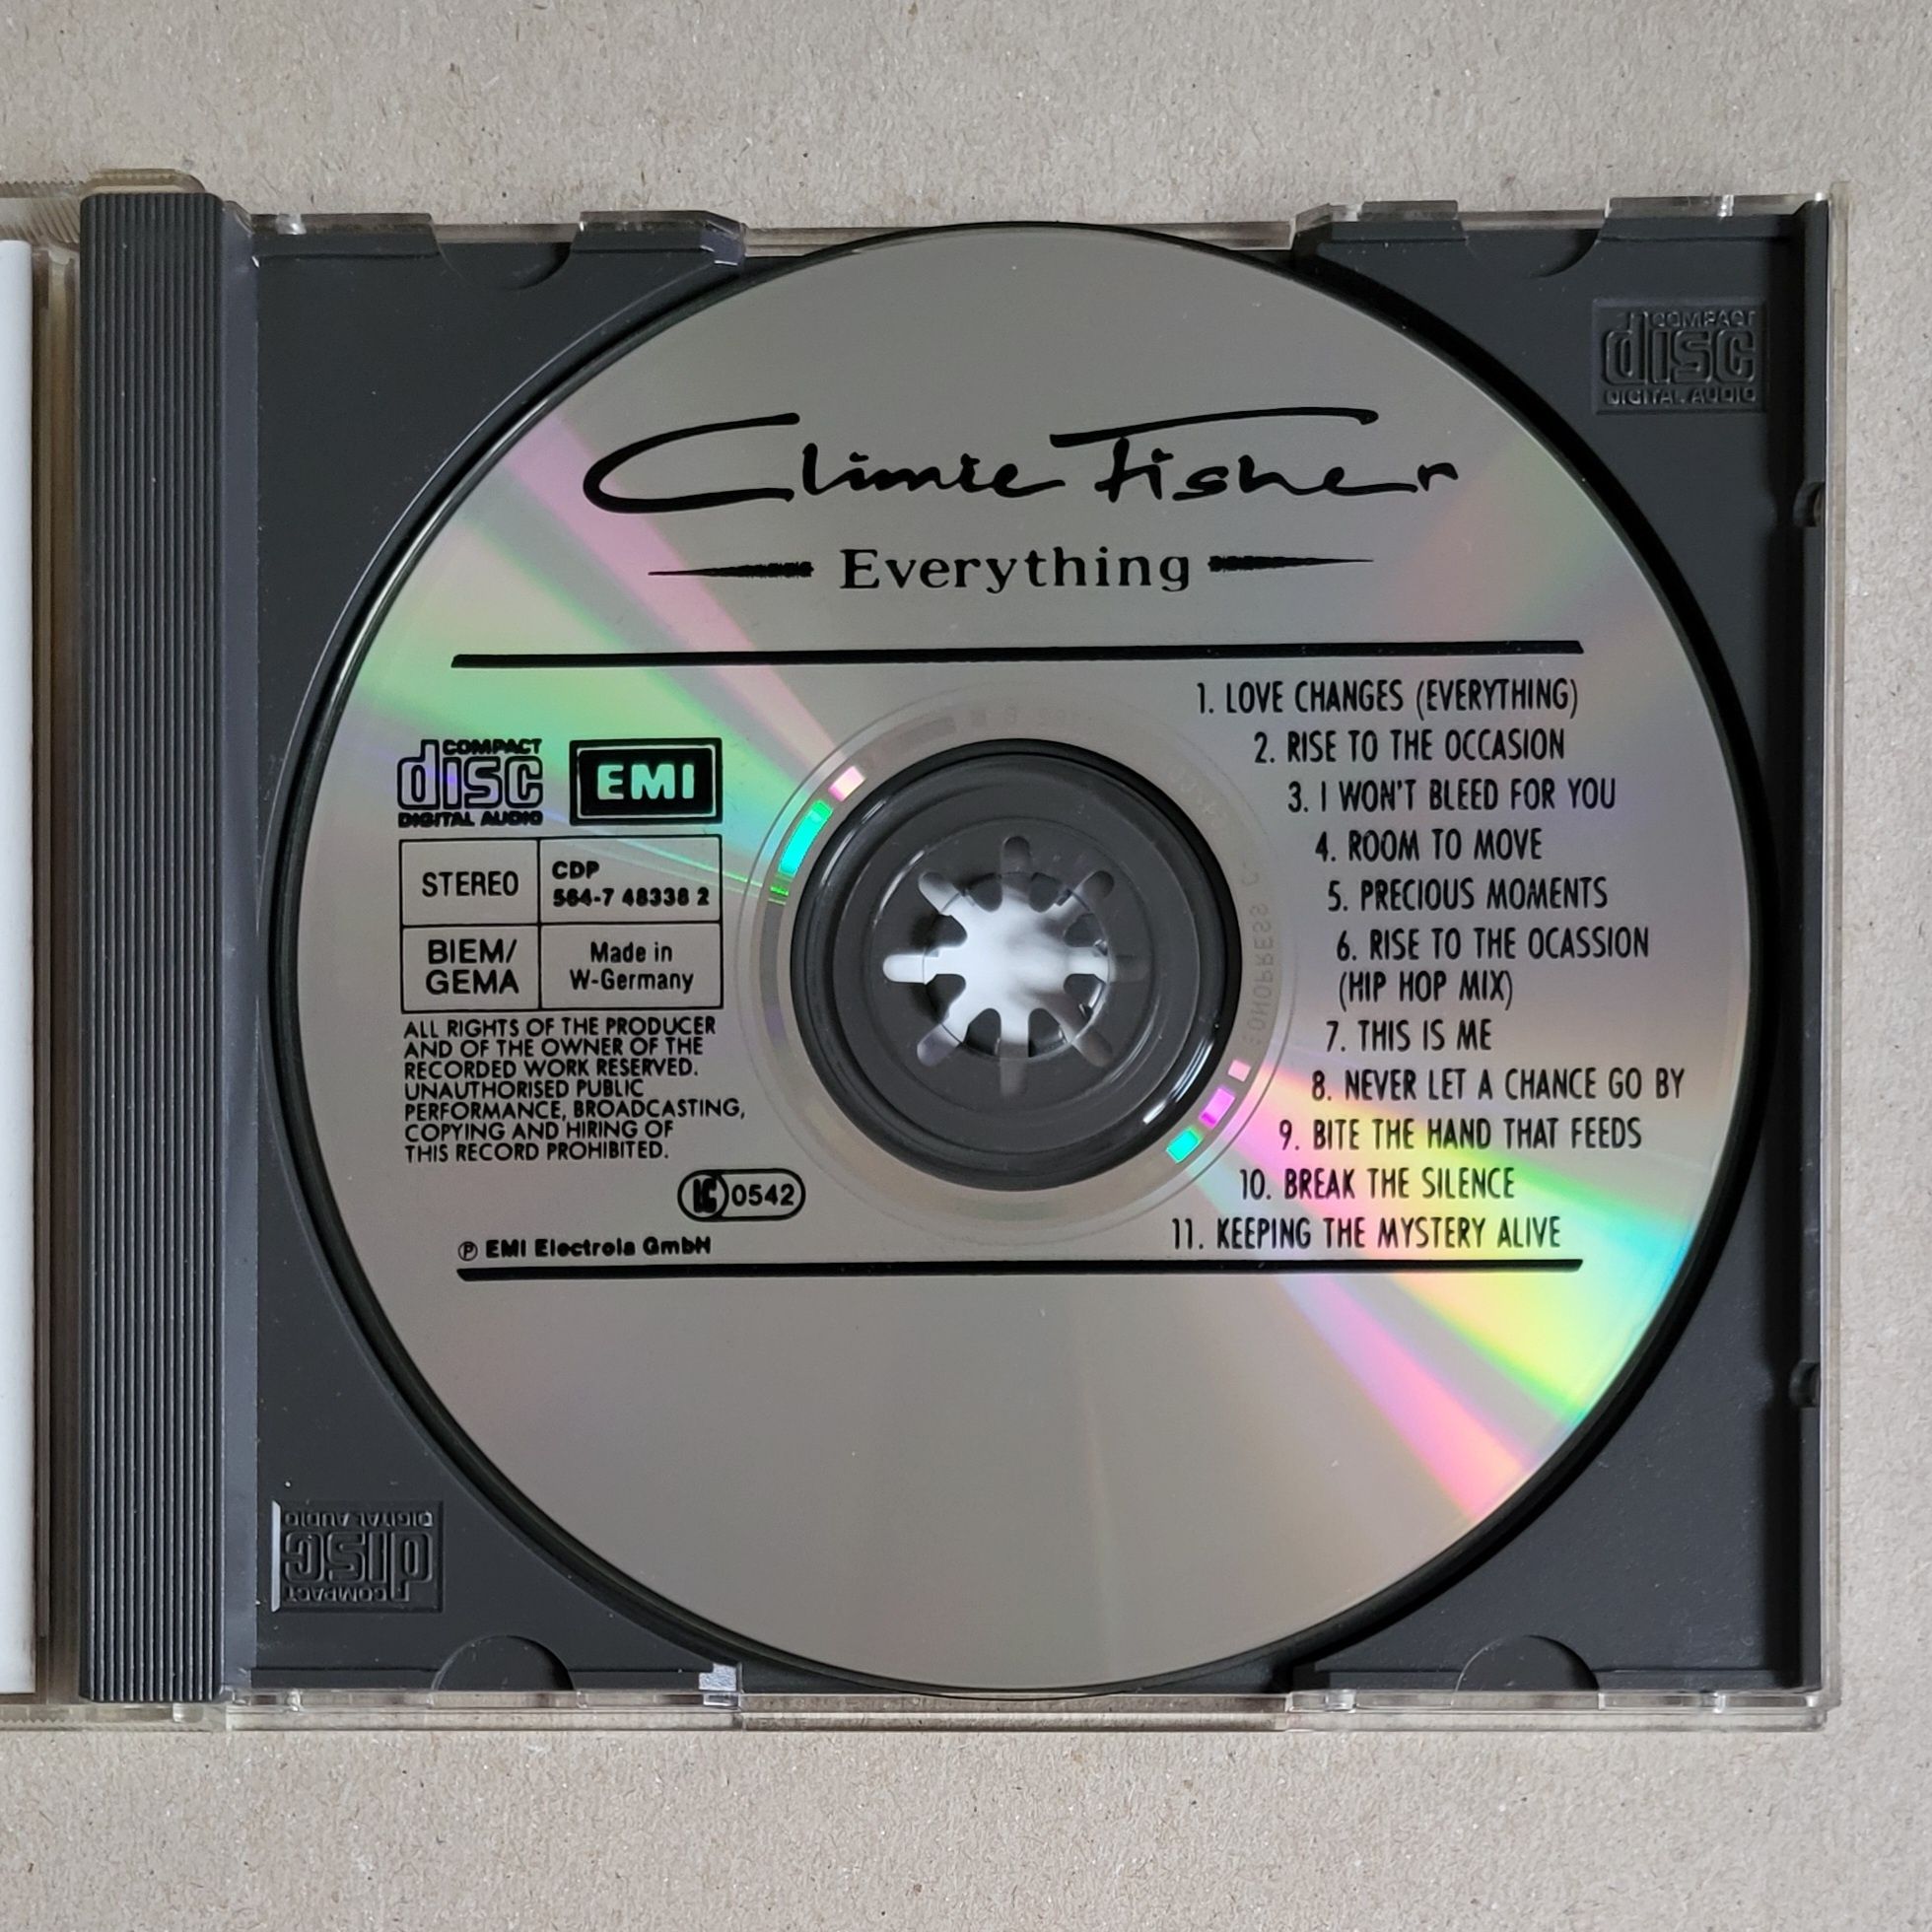 Climie Fisher - Everything (1987) CD